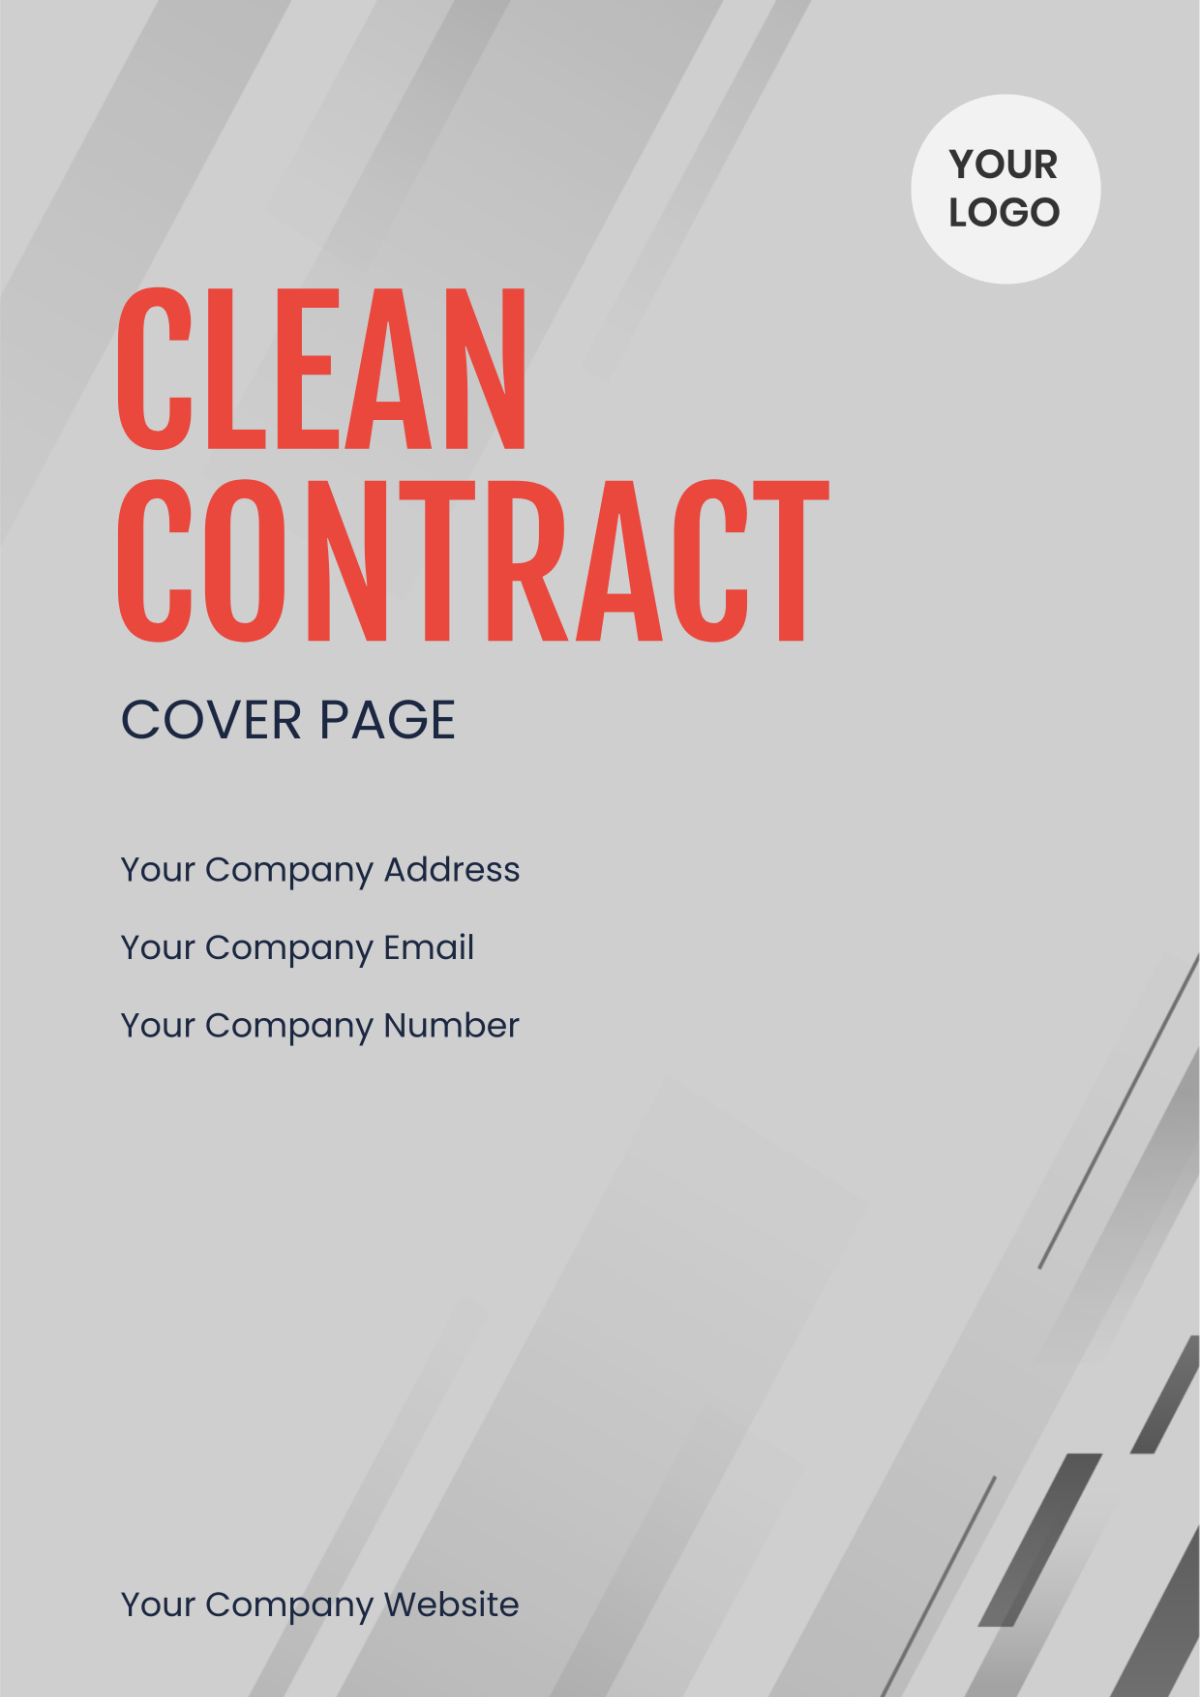 Clean Contract Cover Page